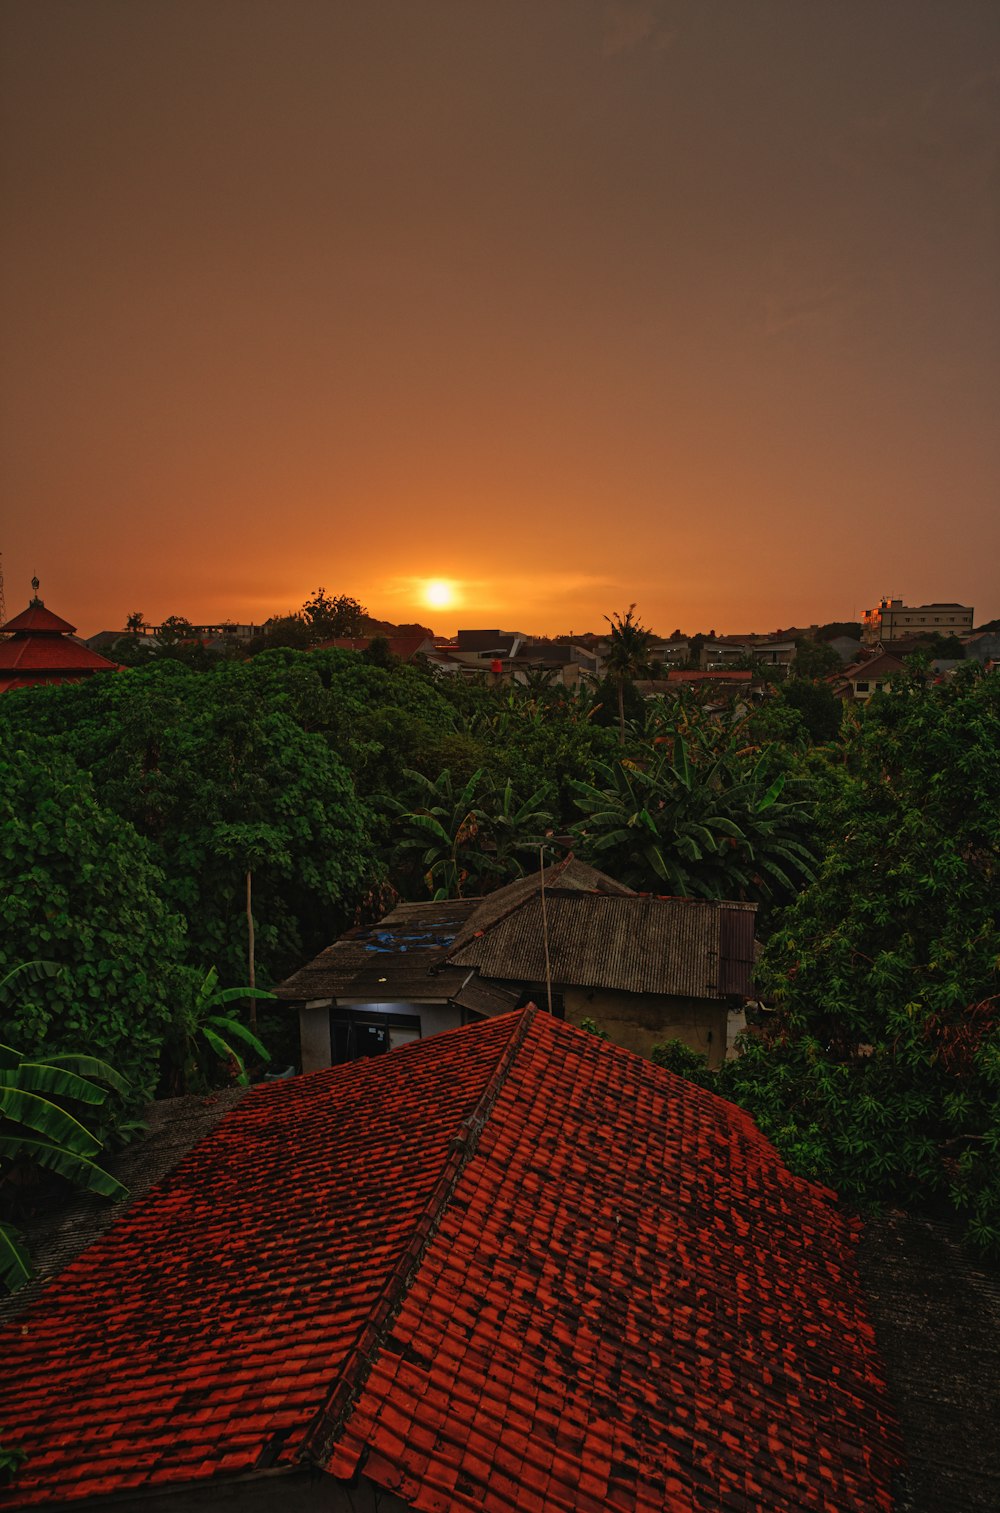 the sun is setting over a small village